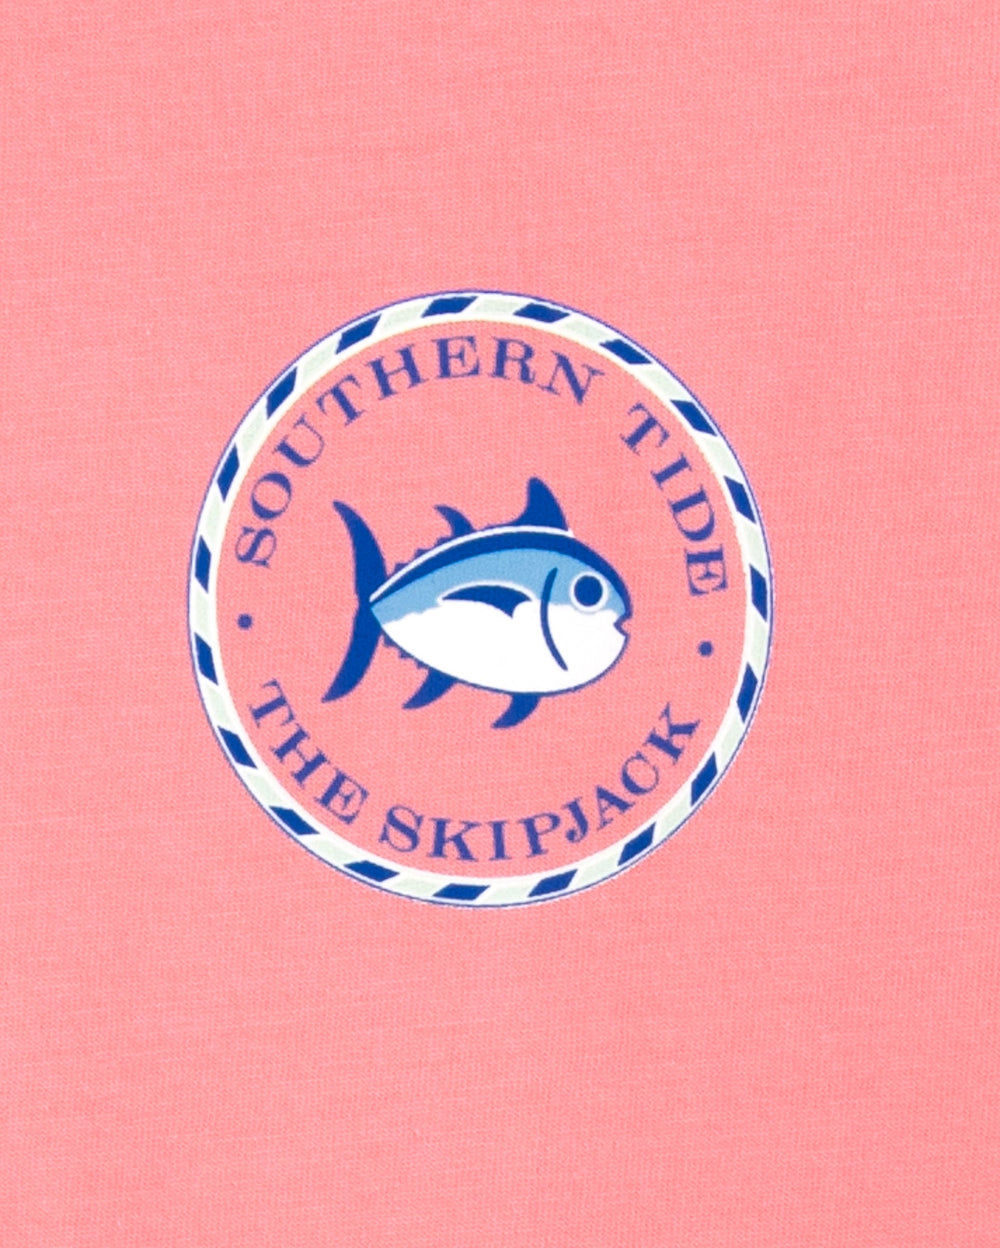 The model pocket view of the Women's Original Skipjack Medallion T-Shirt by Southern Tide - Citrus Punch